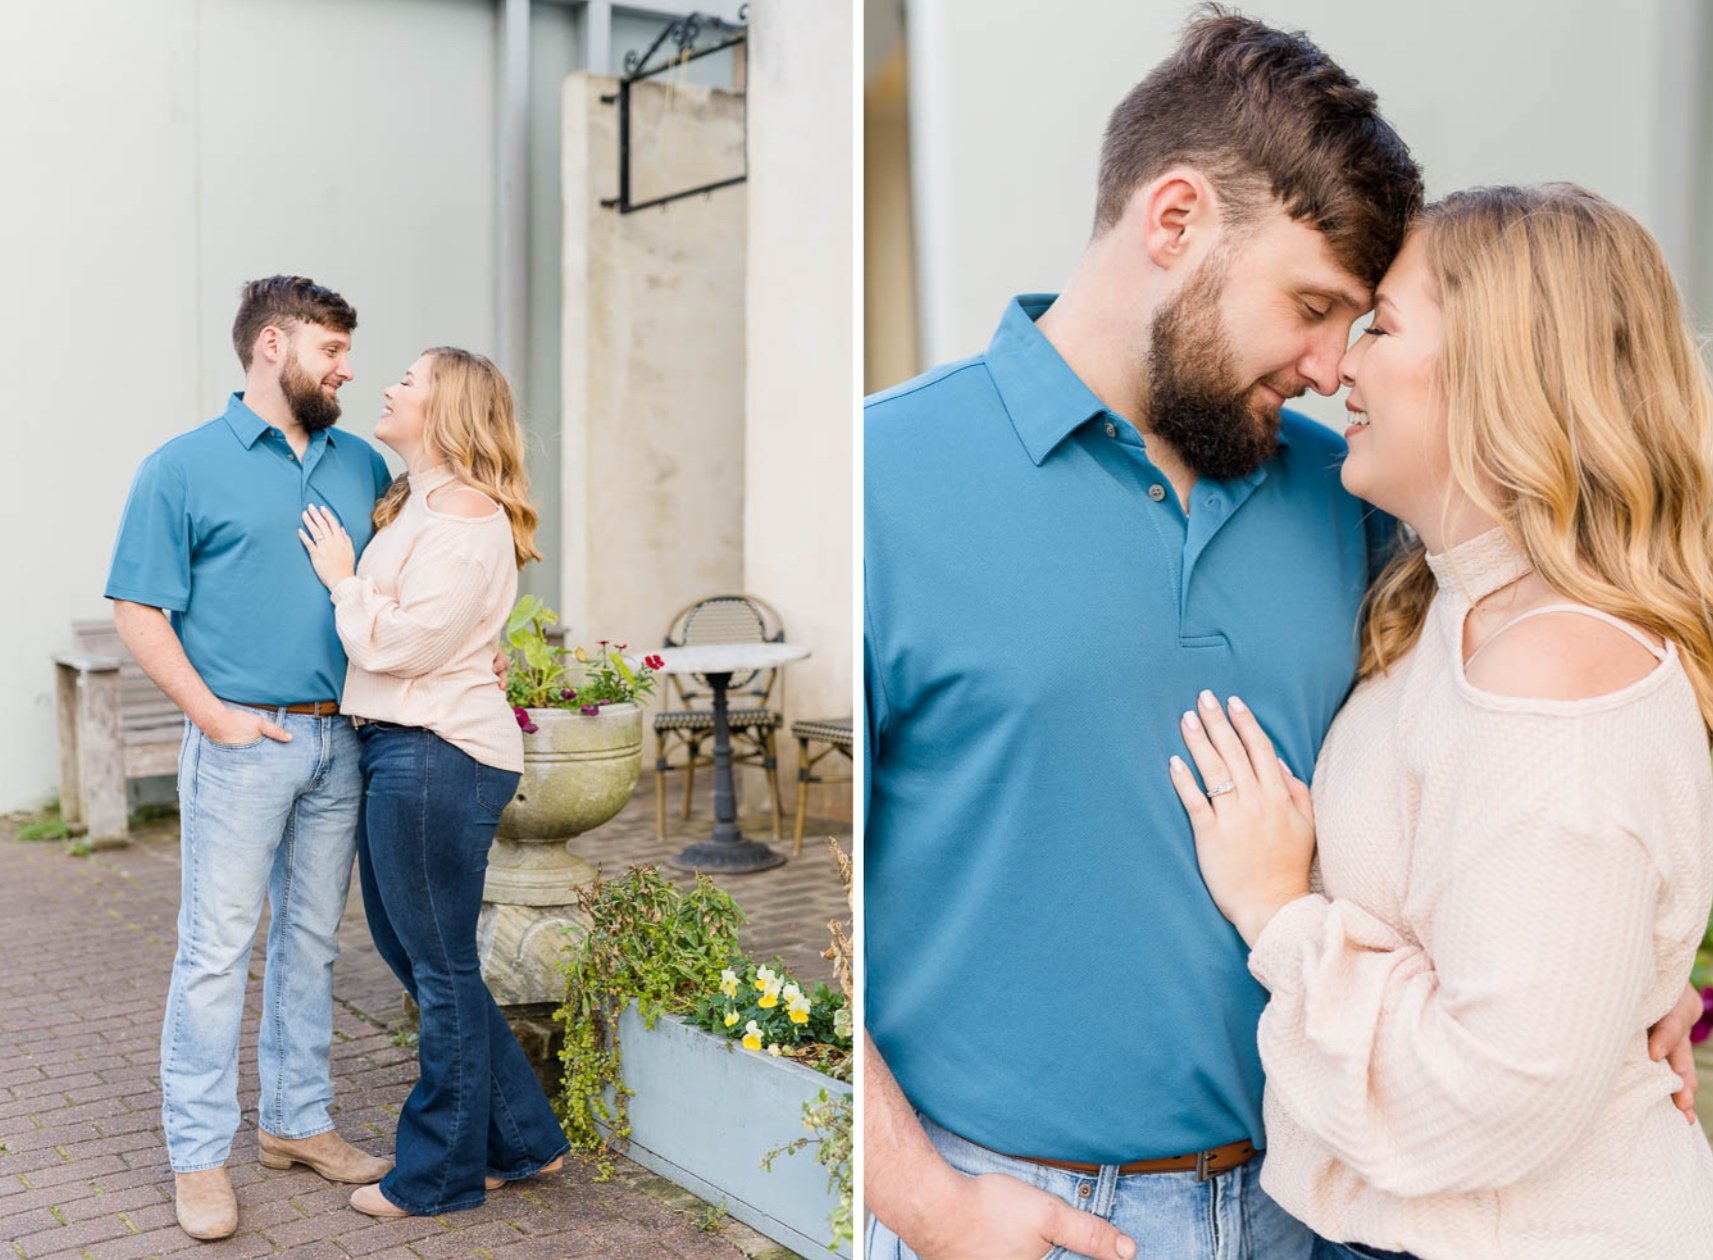 Fairhope Alabama Engagement Session Photoshoot Photographed by Kristen Marcus Photography